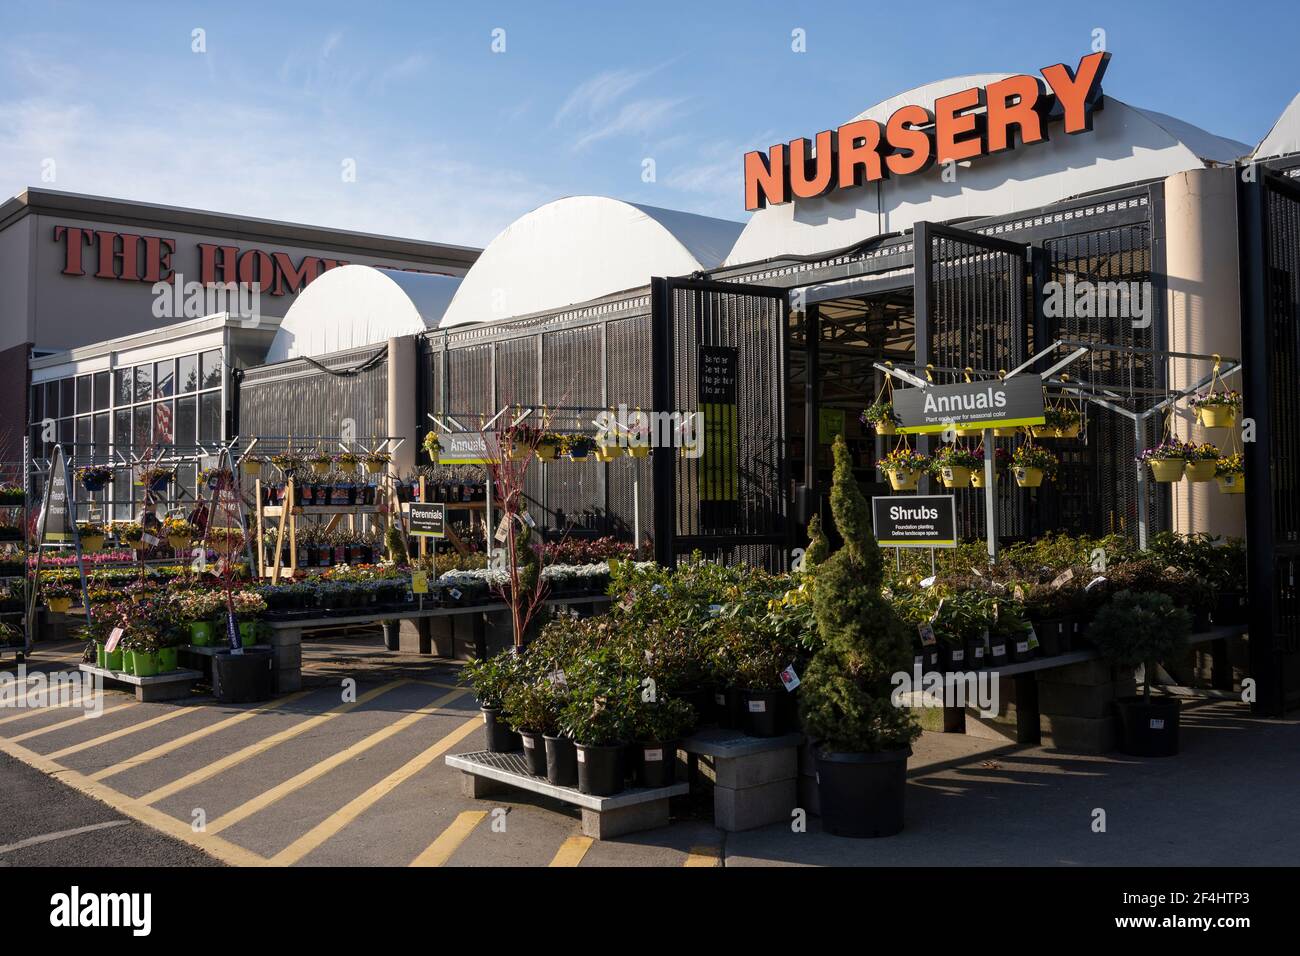 The nursery department storefront at the Home Depot in Tigard, Oregon, seen on Saturday, March 13, 2021. Stock Photo